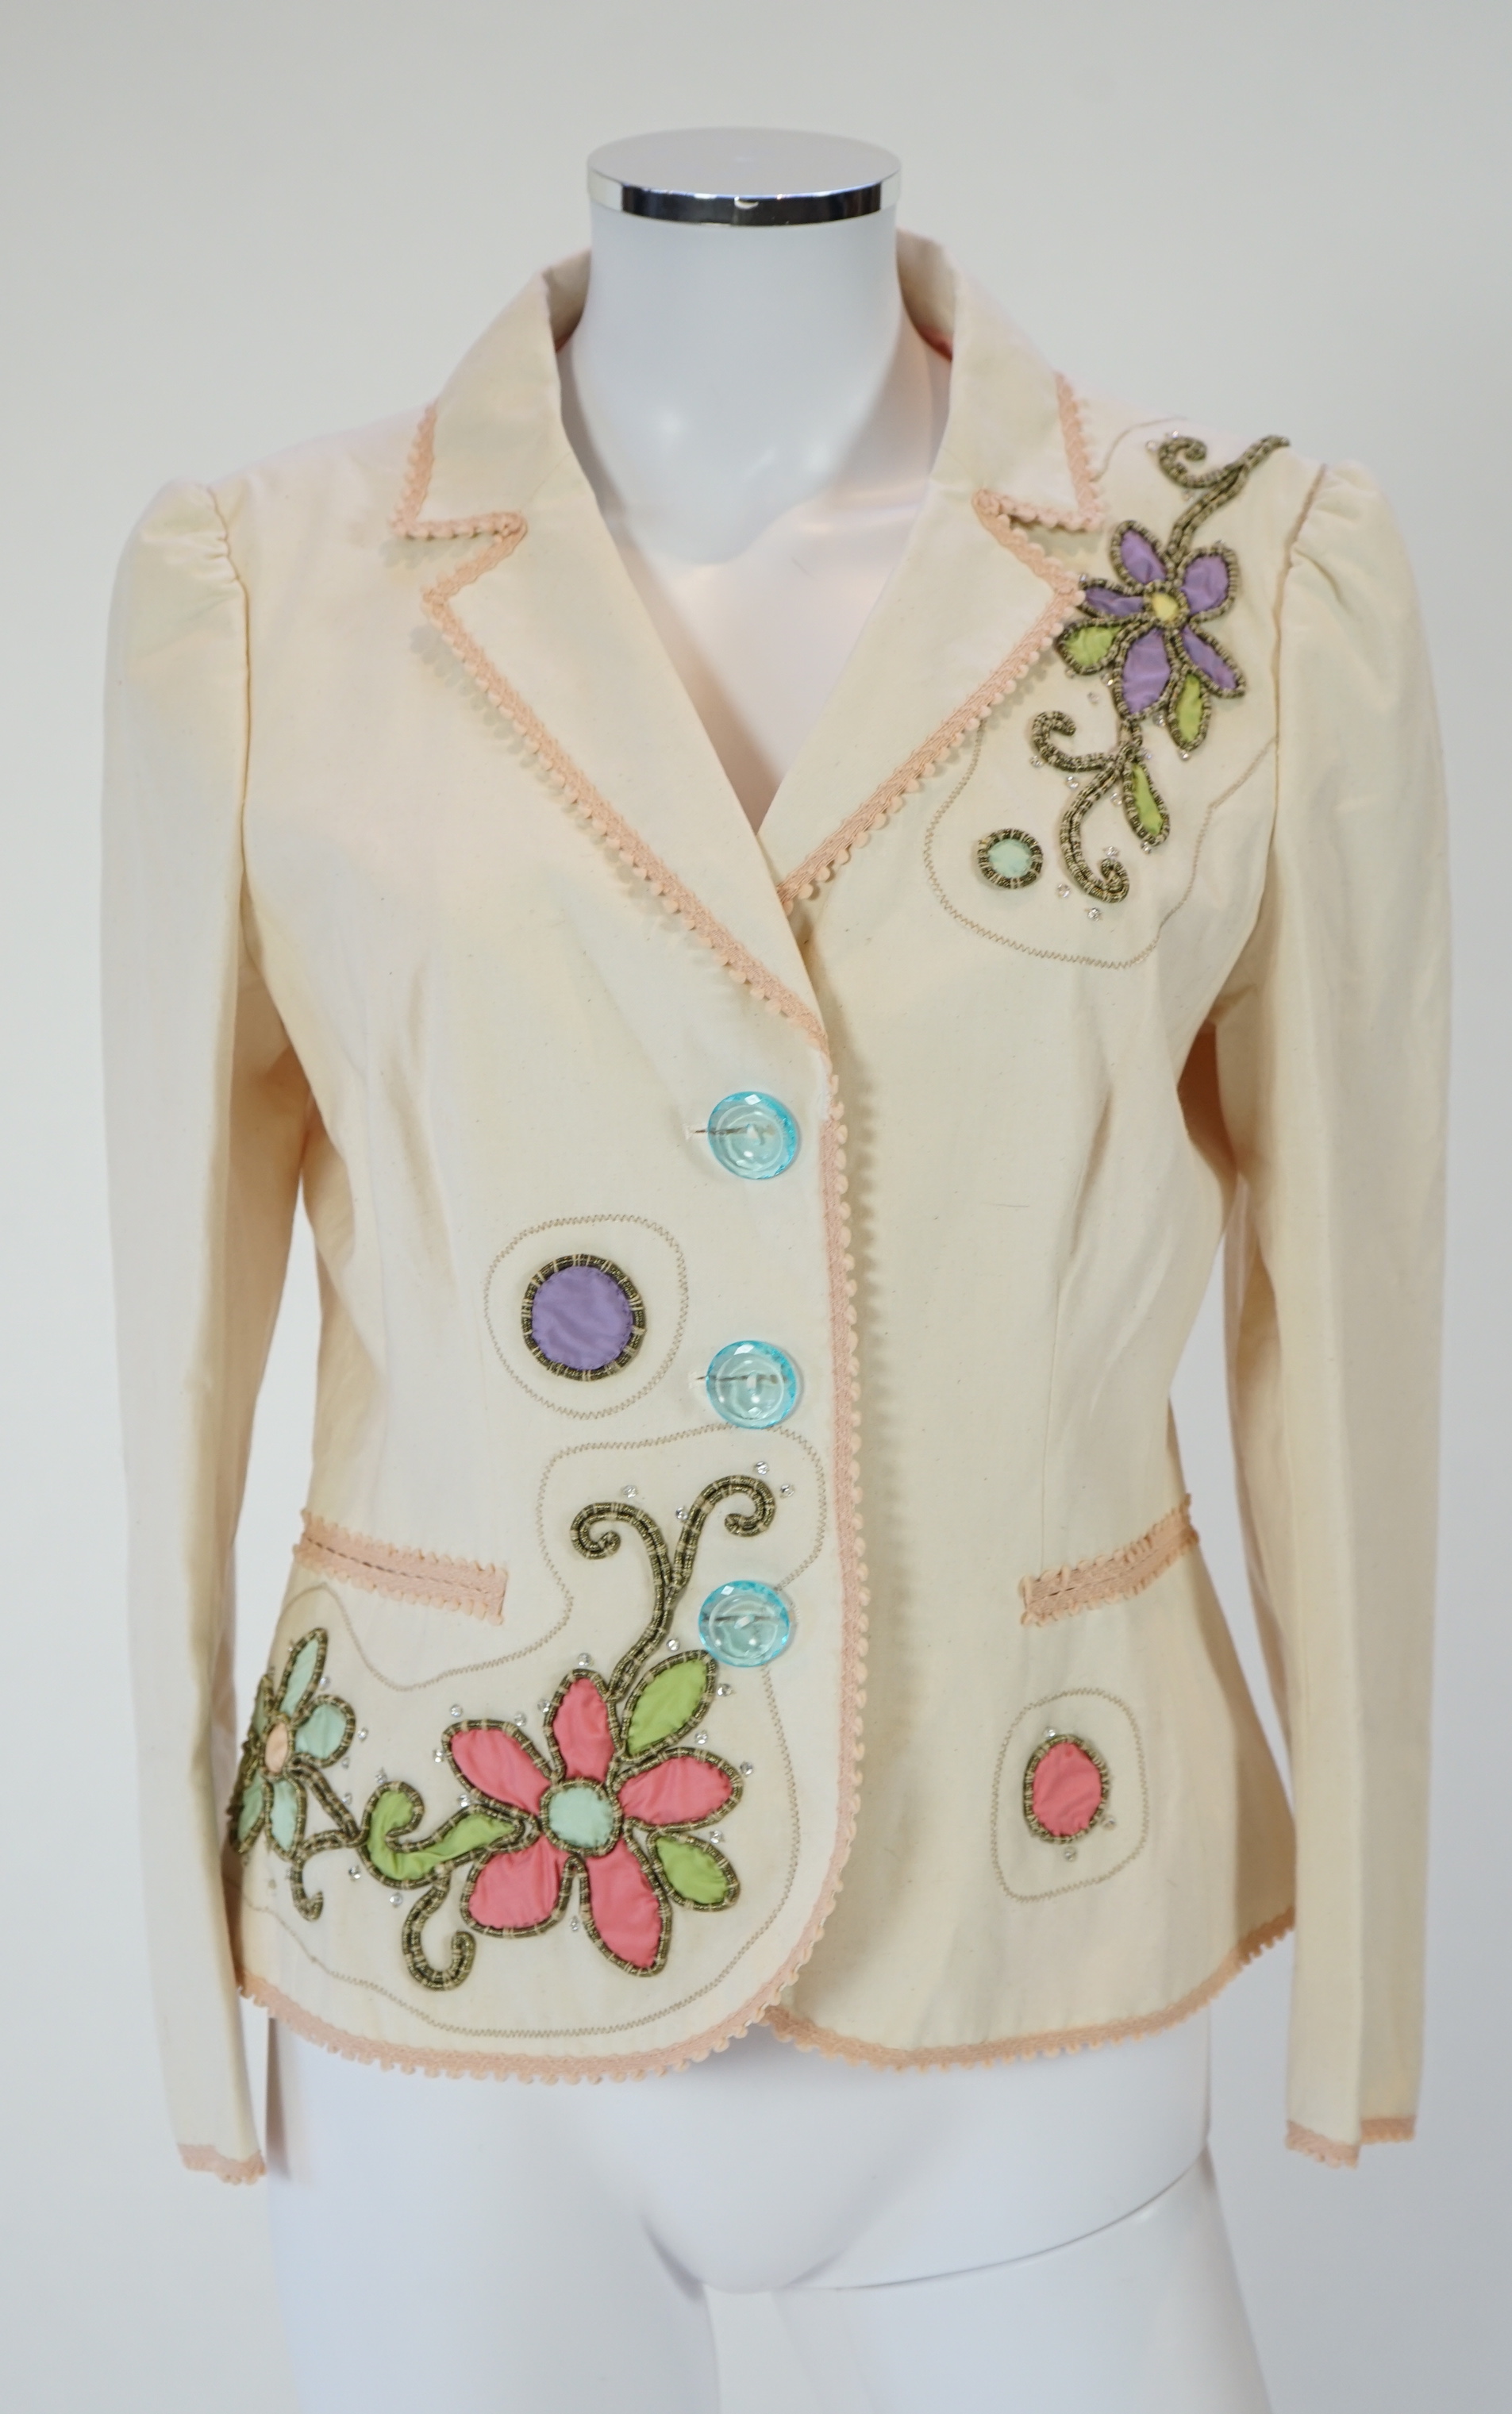 A Moschino lady's long blue and red jacket, a cream cotton embellished blazer and a cotton pair of floral trousers, blue and red jacket size 14, cream blazer size 12, trousers size: 10